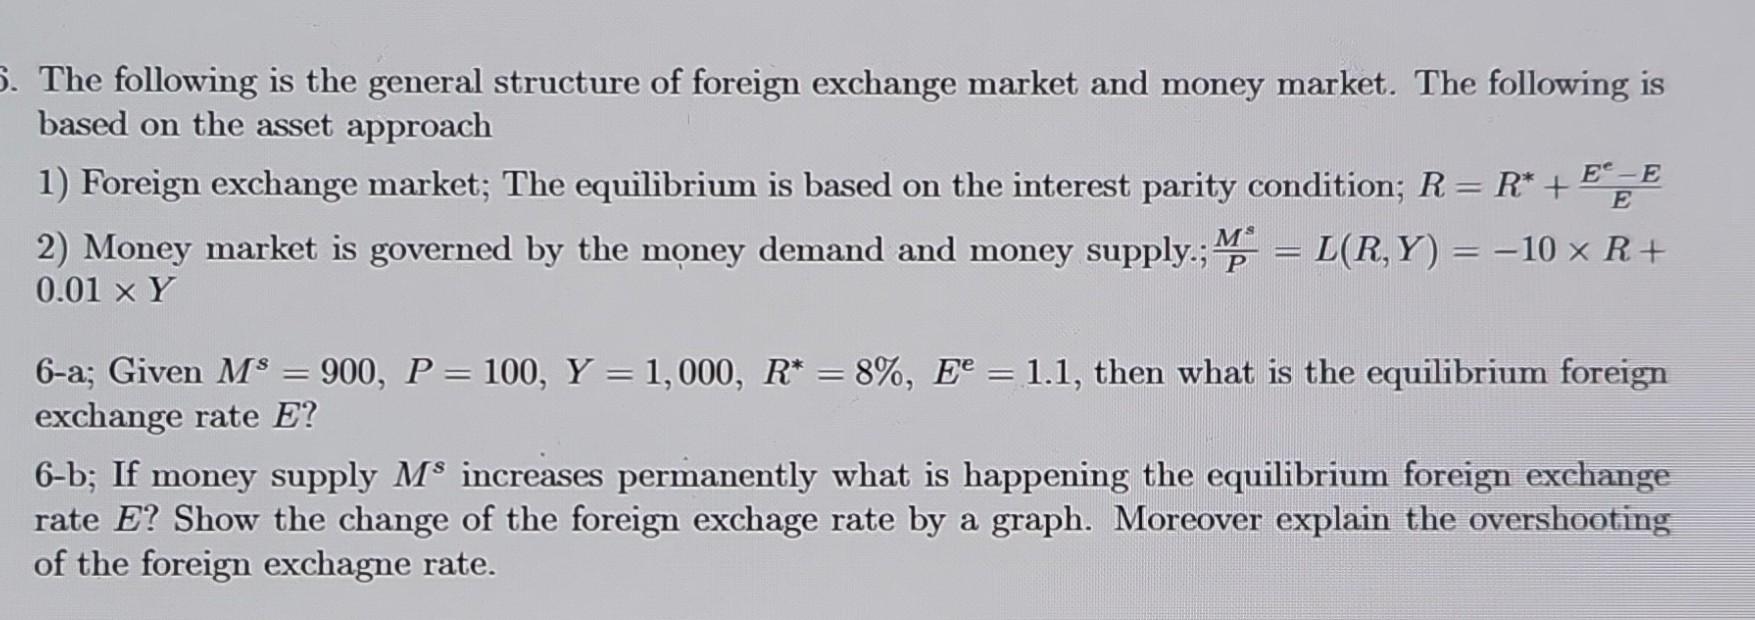 5. The following is the general structure of foreign exchange market and money market. The following is based